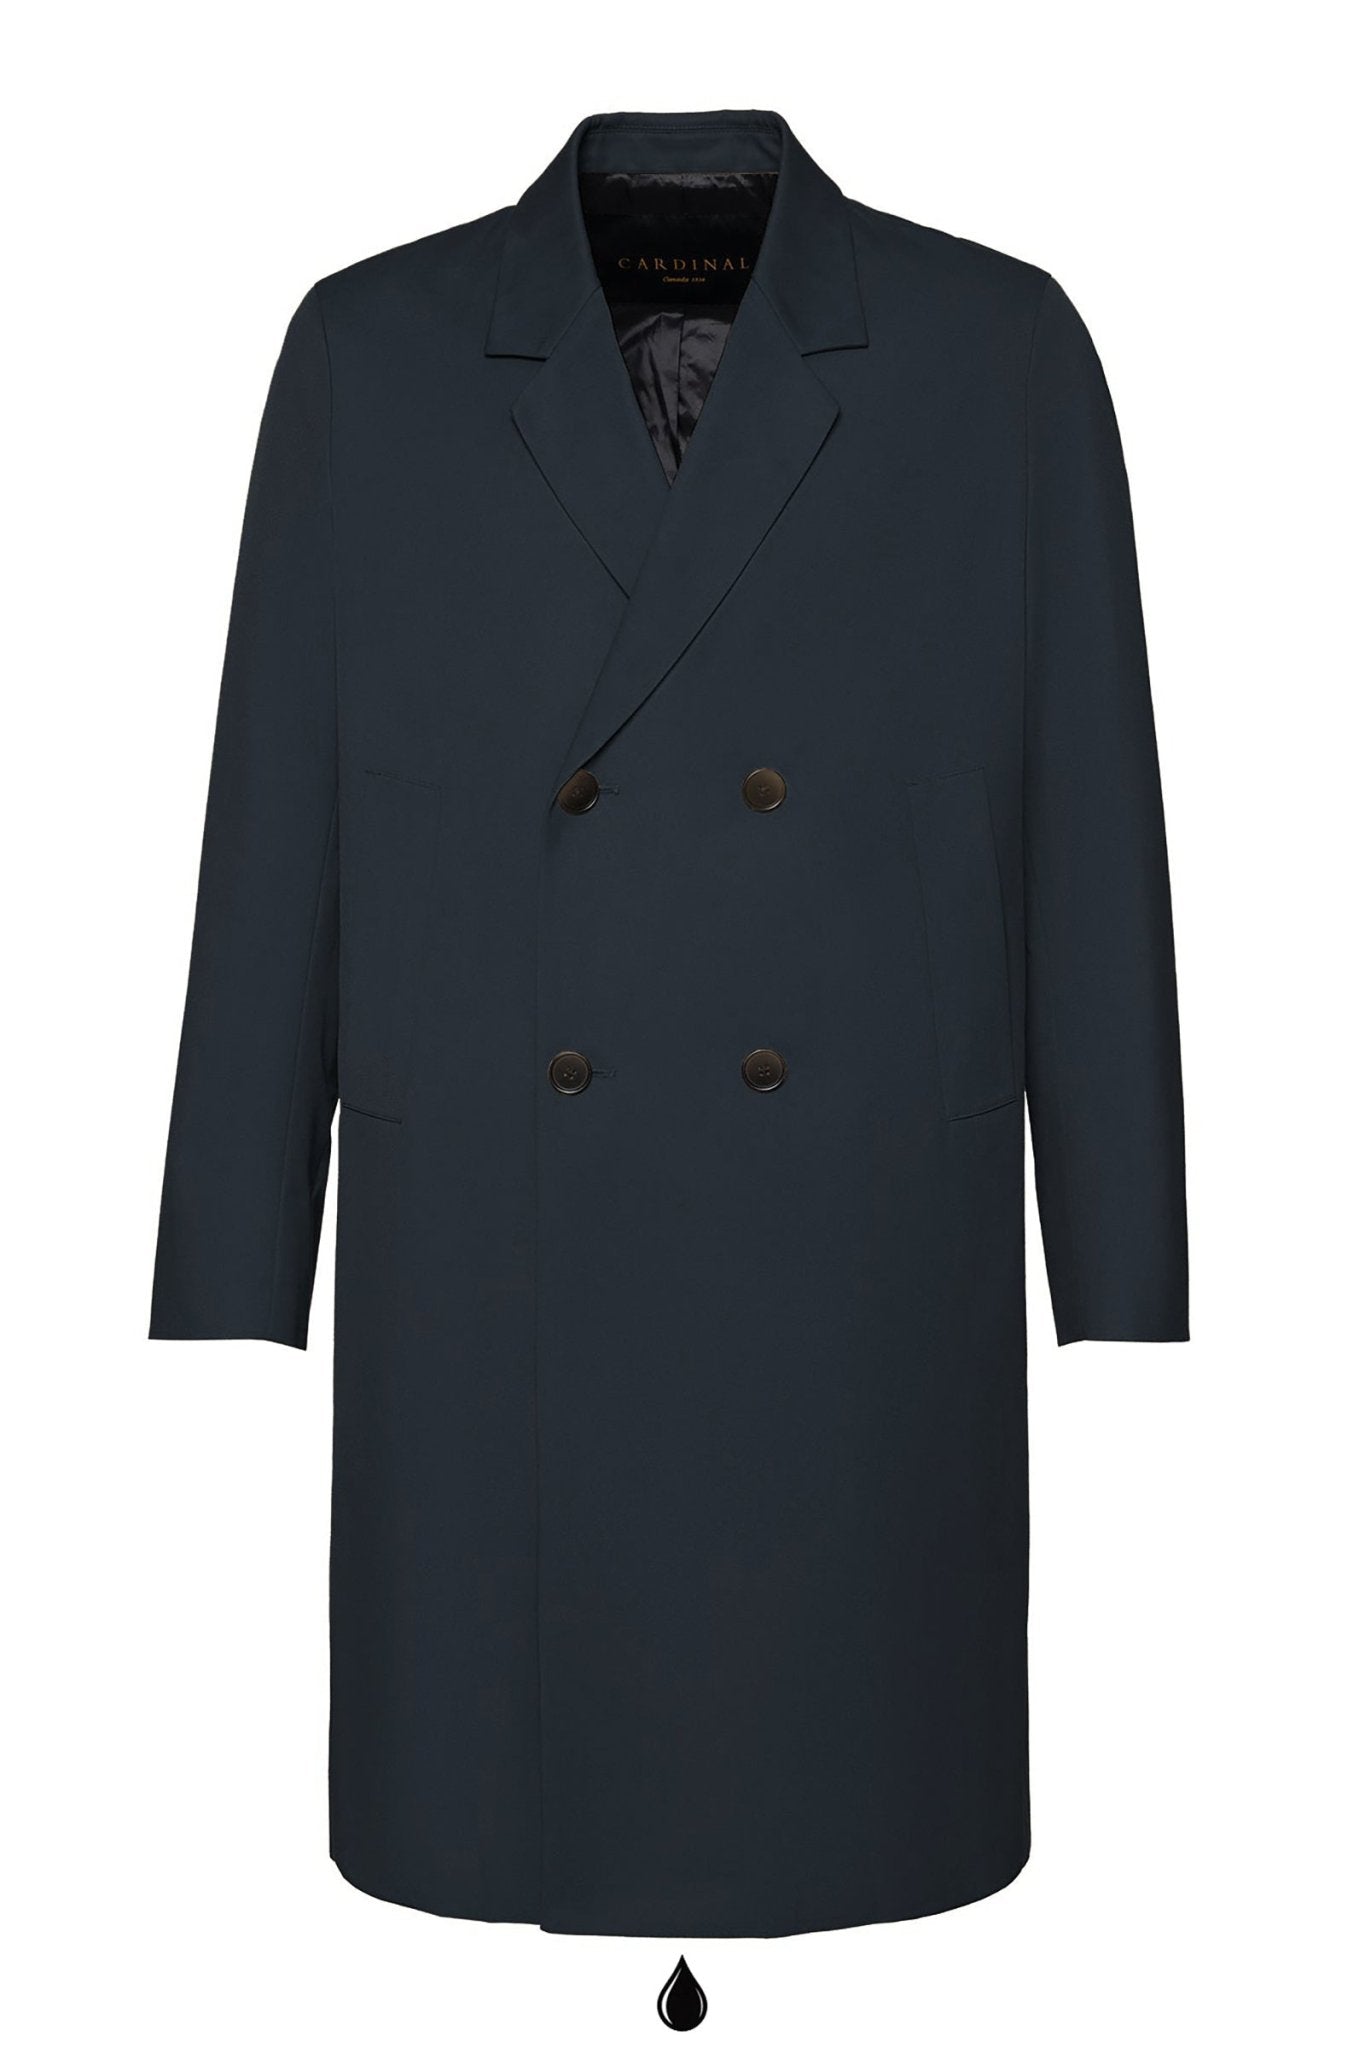 LIMITED EDITION: SCOTTSDALE DOUBLE BREAST RELAXED TOPCOAT - Cardinal of Canada-US-LIMITED EDITION: SCOTTSDALE DOUBLE BREAST RELAXED NAVY TOPCOAT